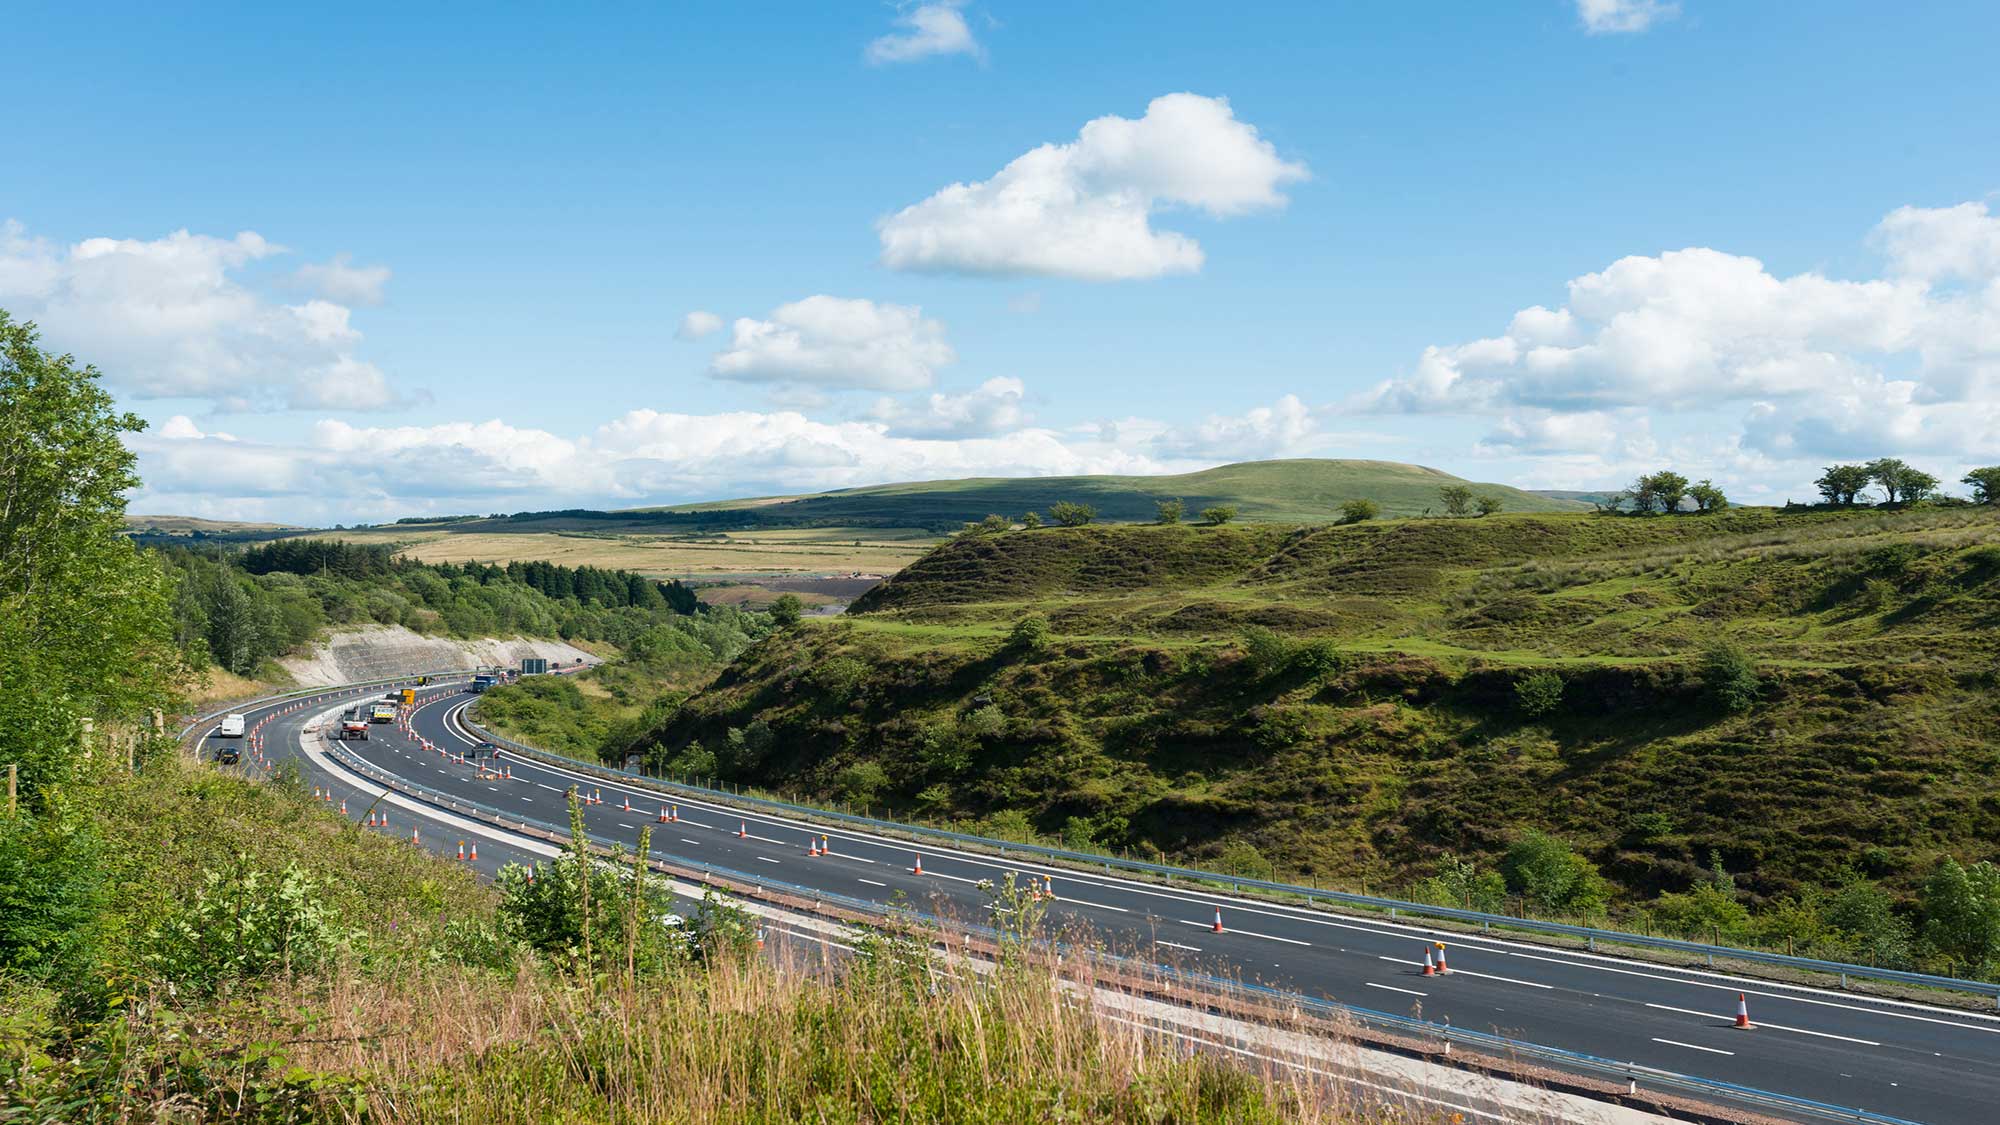 7.8km upgrade to one of Wales' most important highways